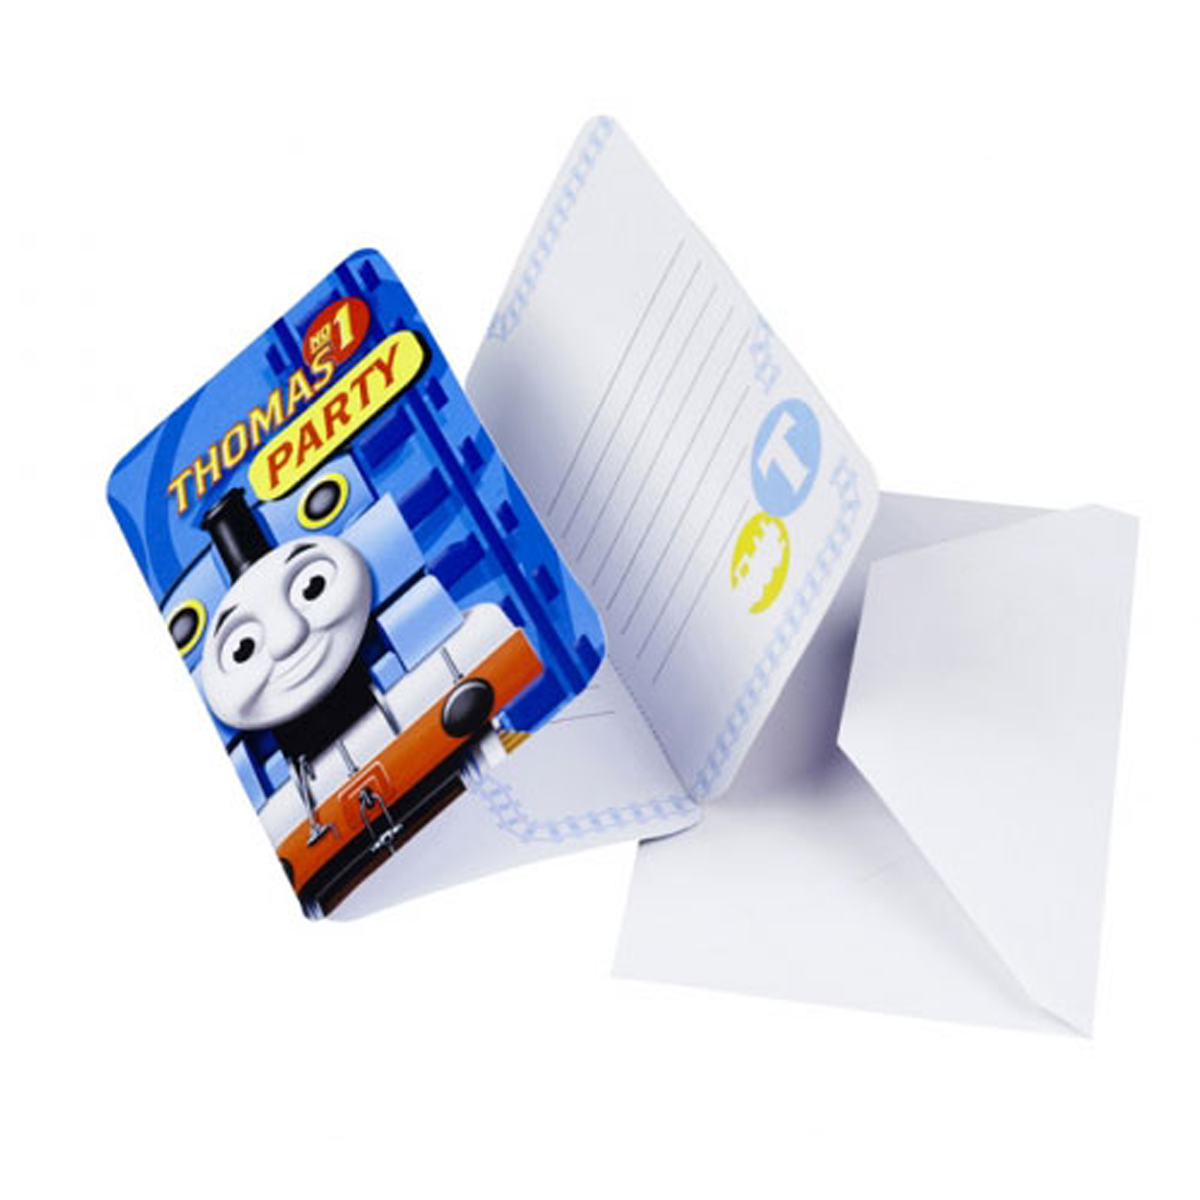 Thomas And Friends Invitations And Envelopes 6pcs Party Accessories - Party Centre